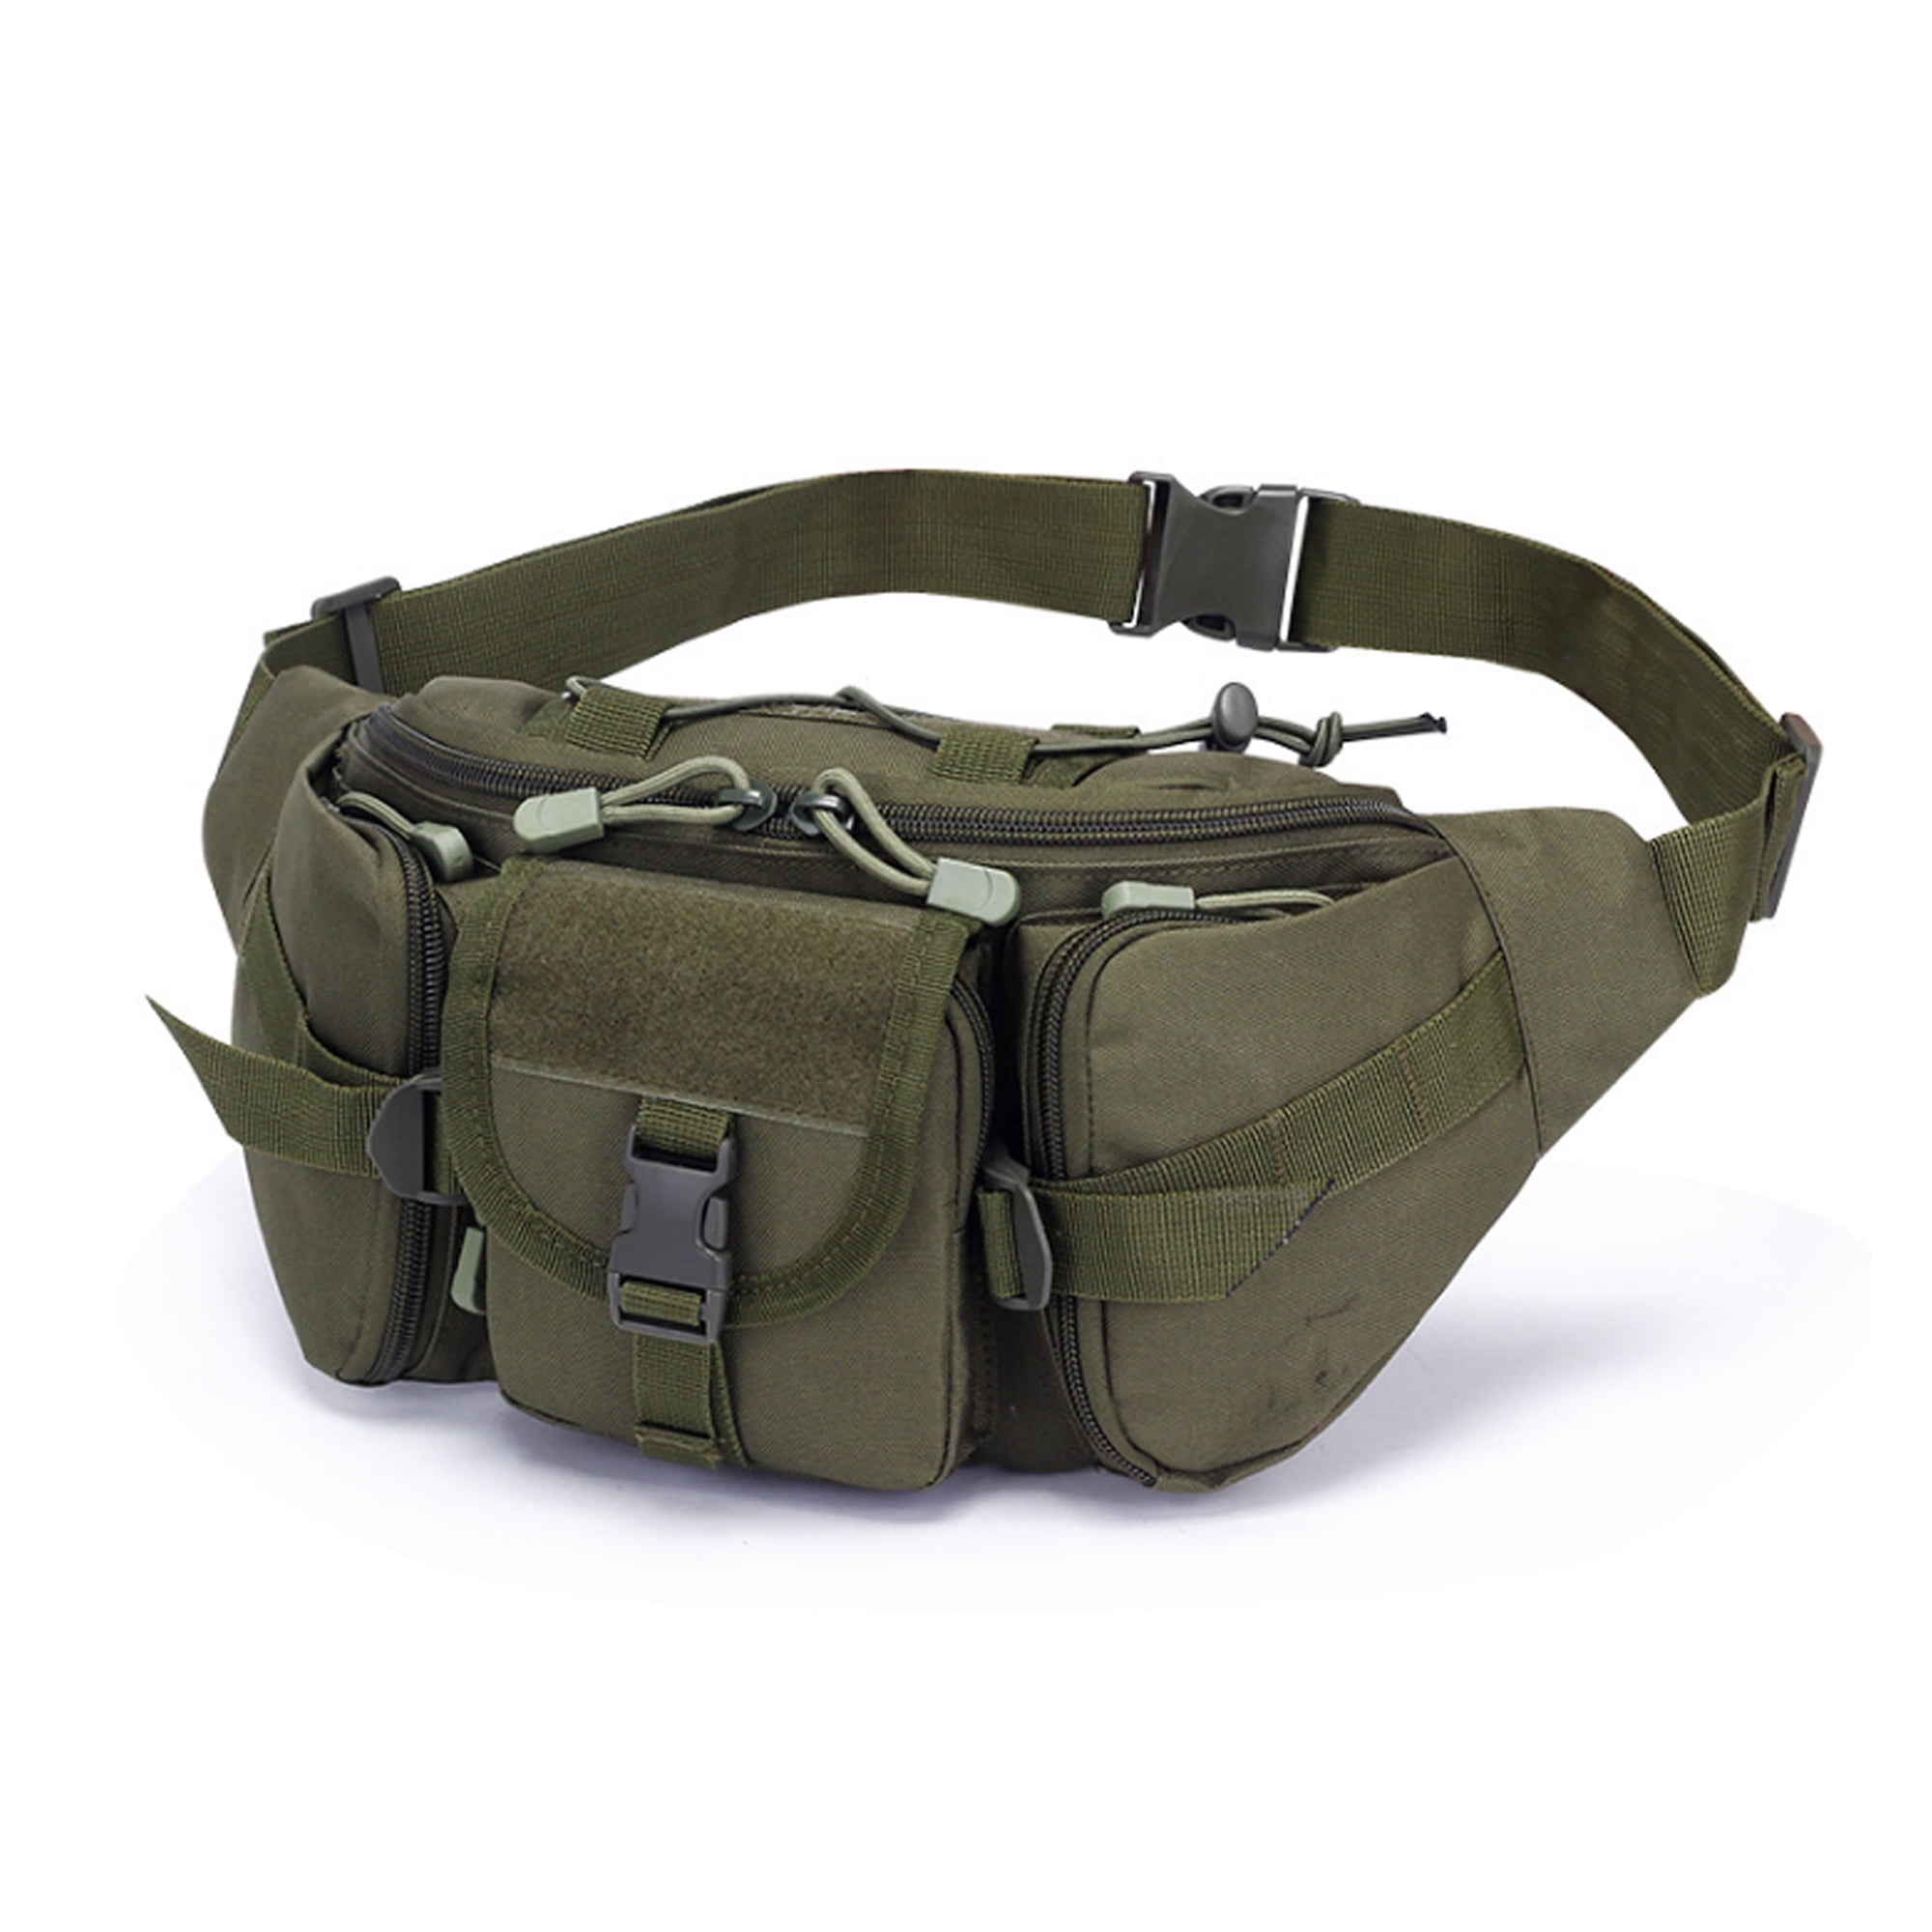 Fullvigor Utility Tactical Waist Pack Pouch Military Camping Hiking ...